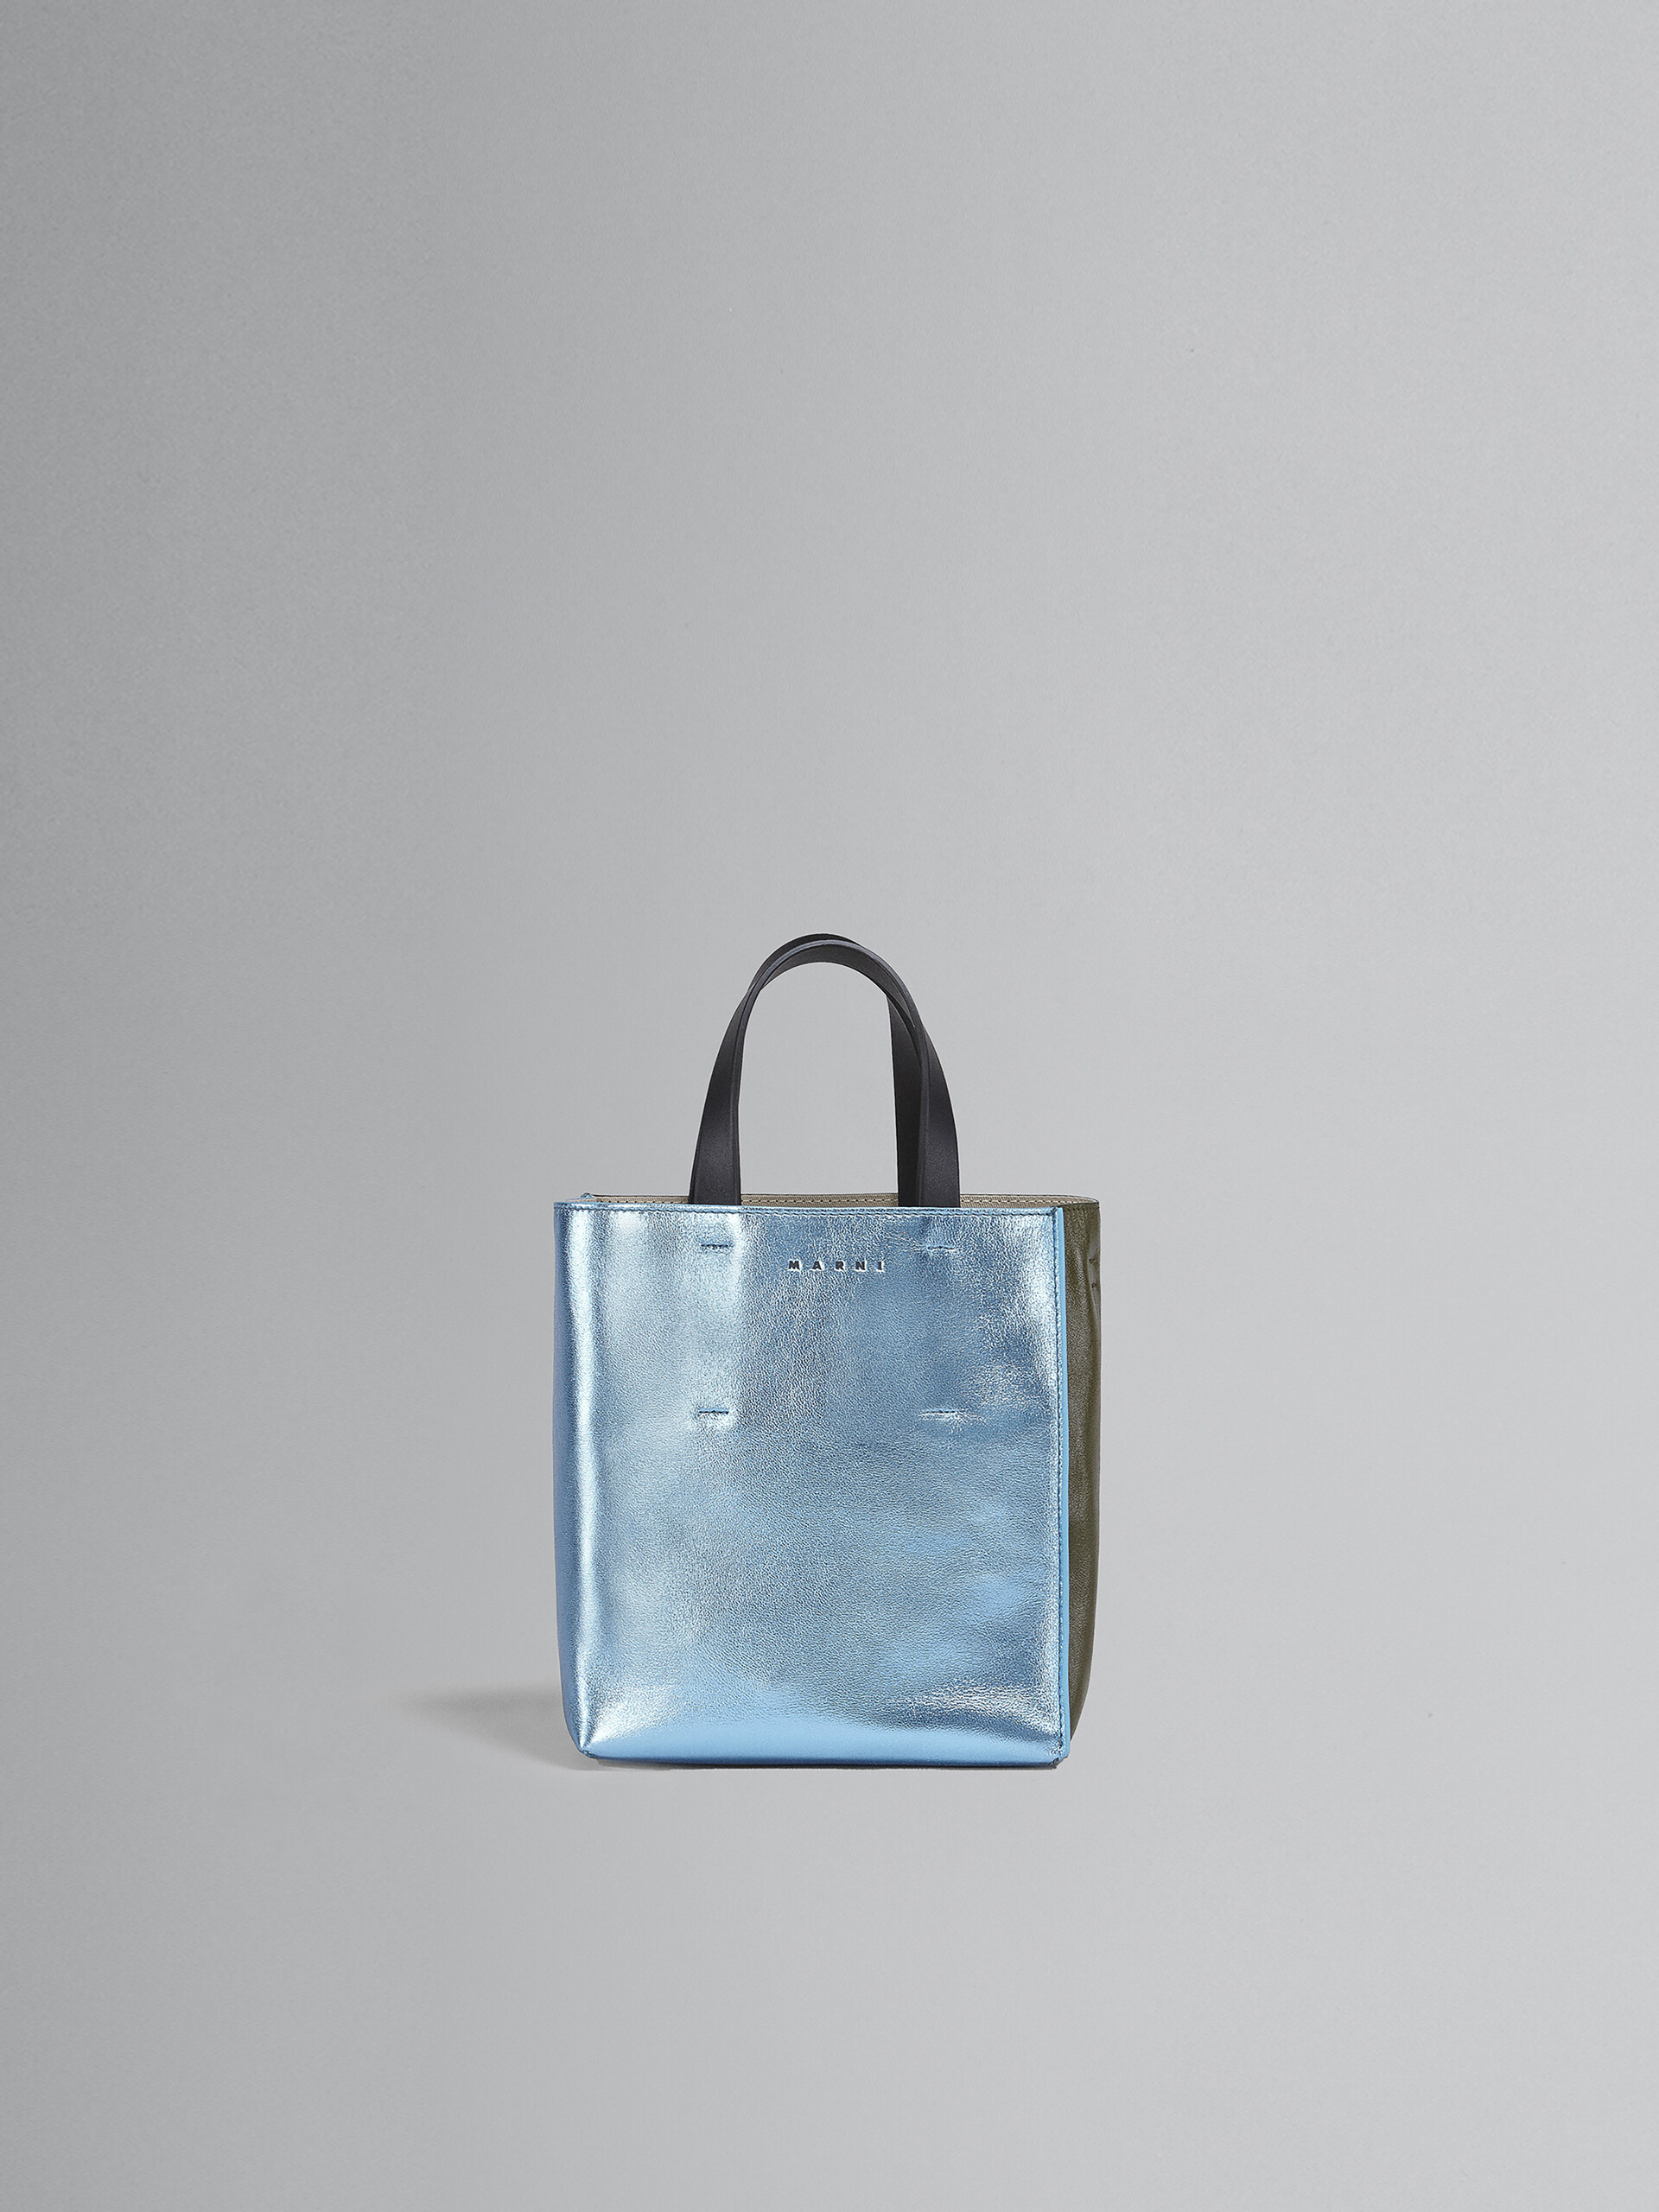 MUSEO mini bag in pale blue and green metallic leather - Shopping Bags - Image 1